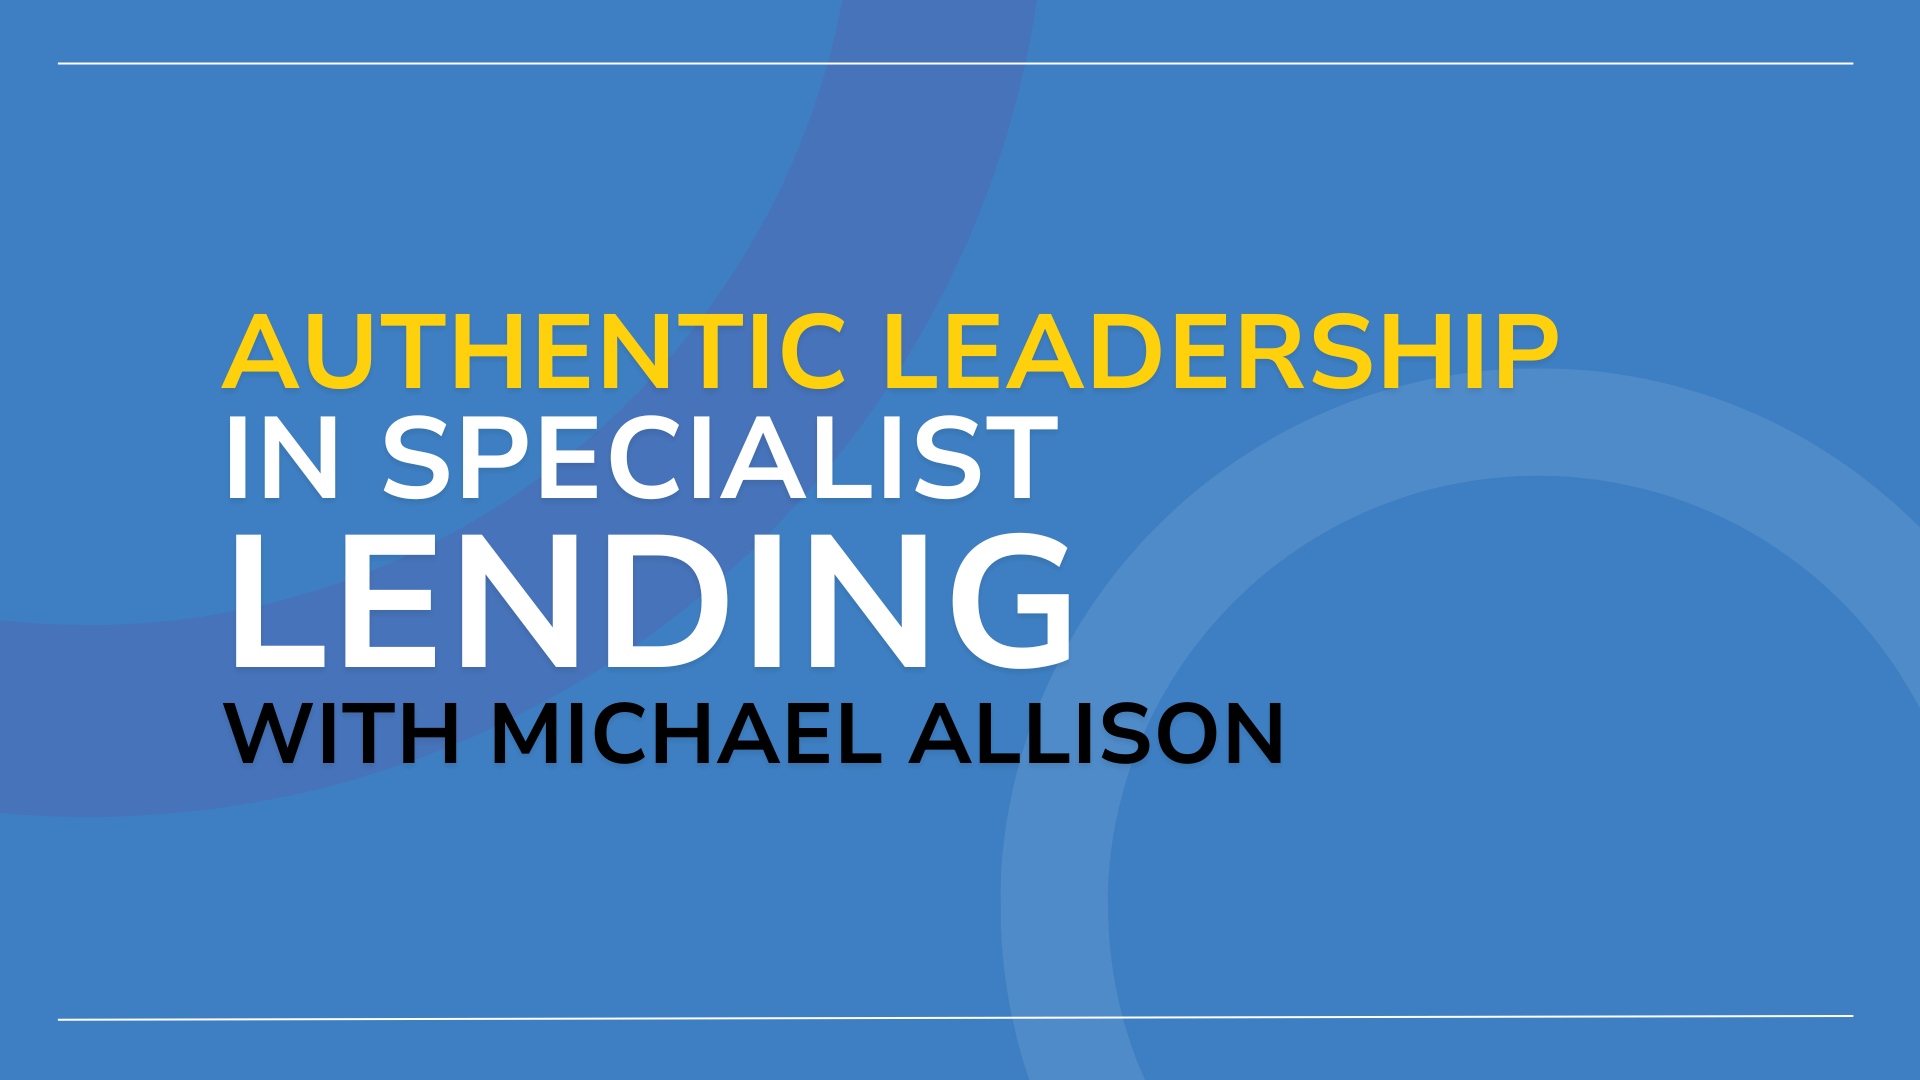 22:35 / 50:37 Authentic Leadership in Specialist Lending with Michael Allison